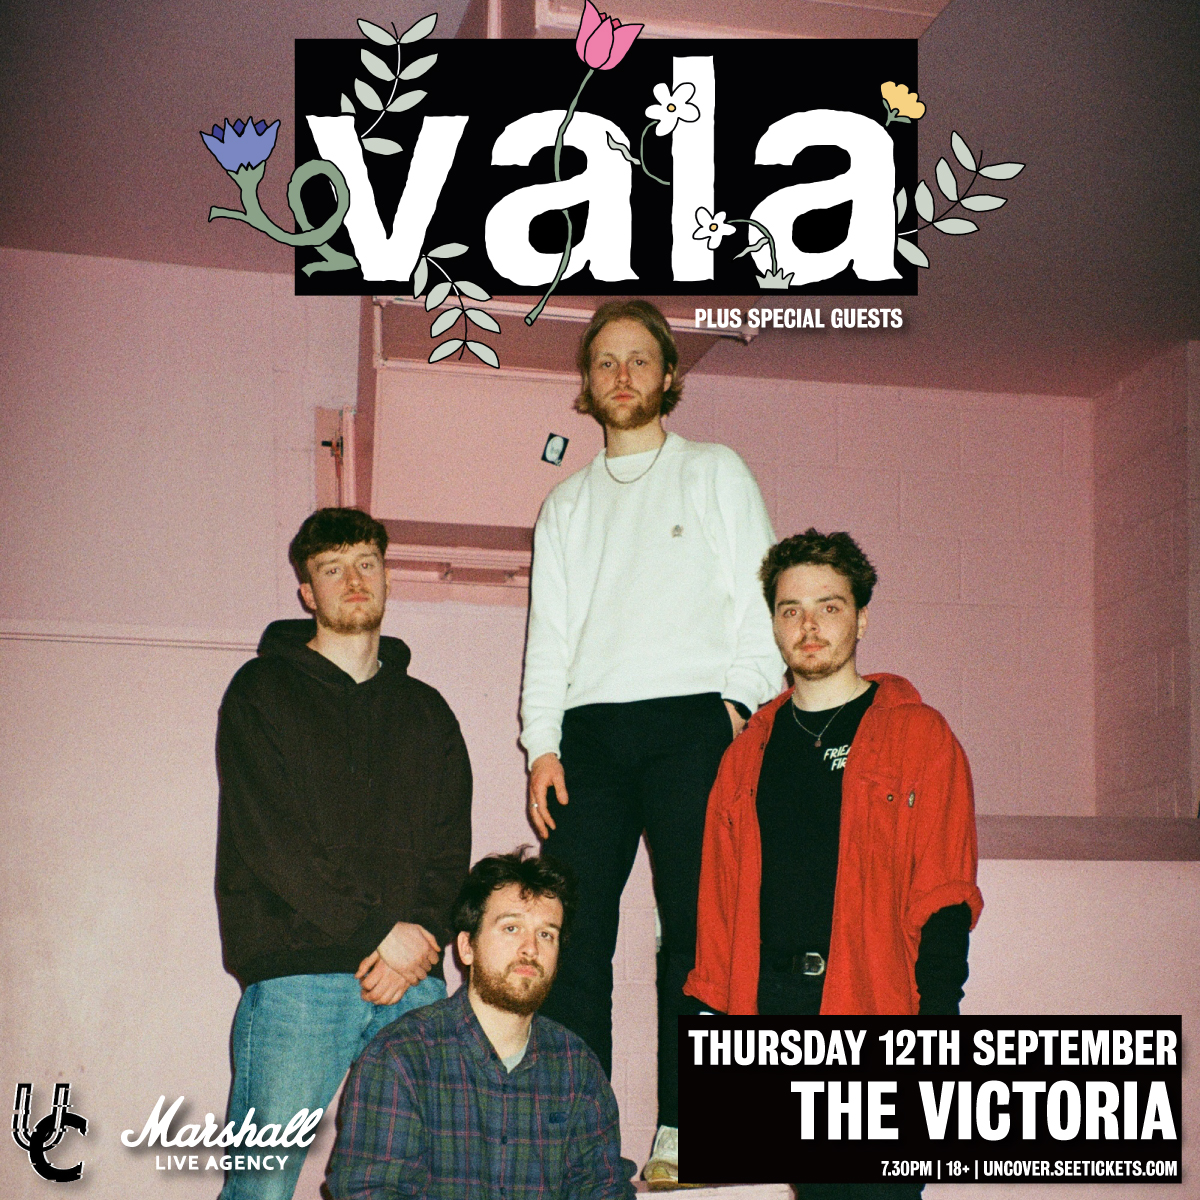 Coming up! Mancunian indie boy band @VALAmanchester headline on Thursday, 12th September 💥 Tickets on sale now: tinyurl.com/47e3r8sy